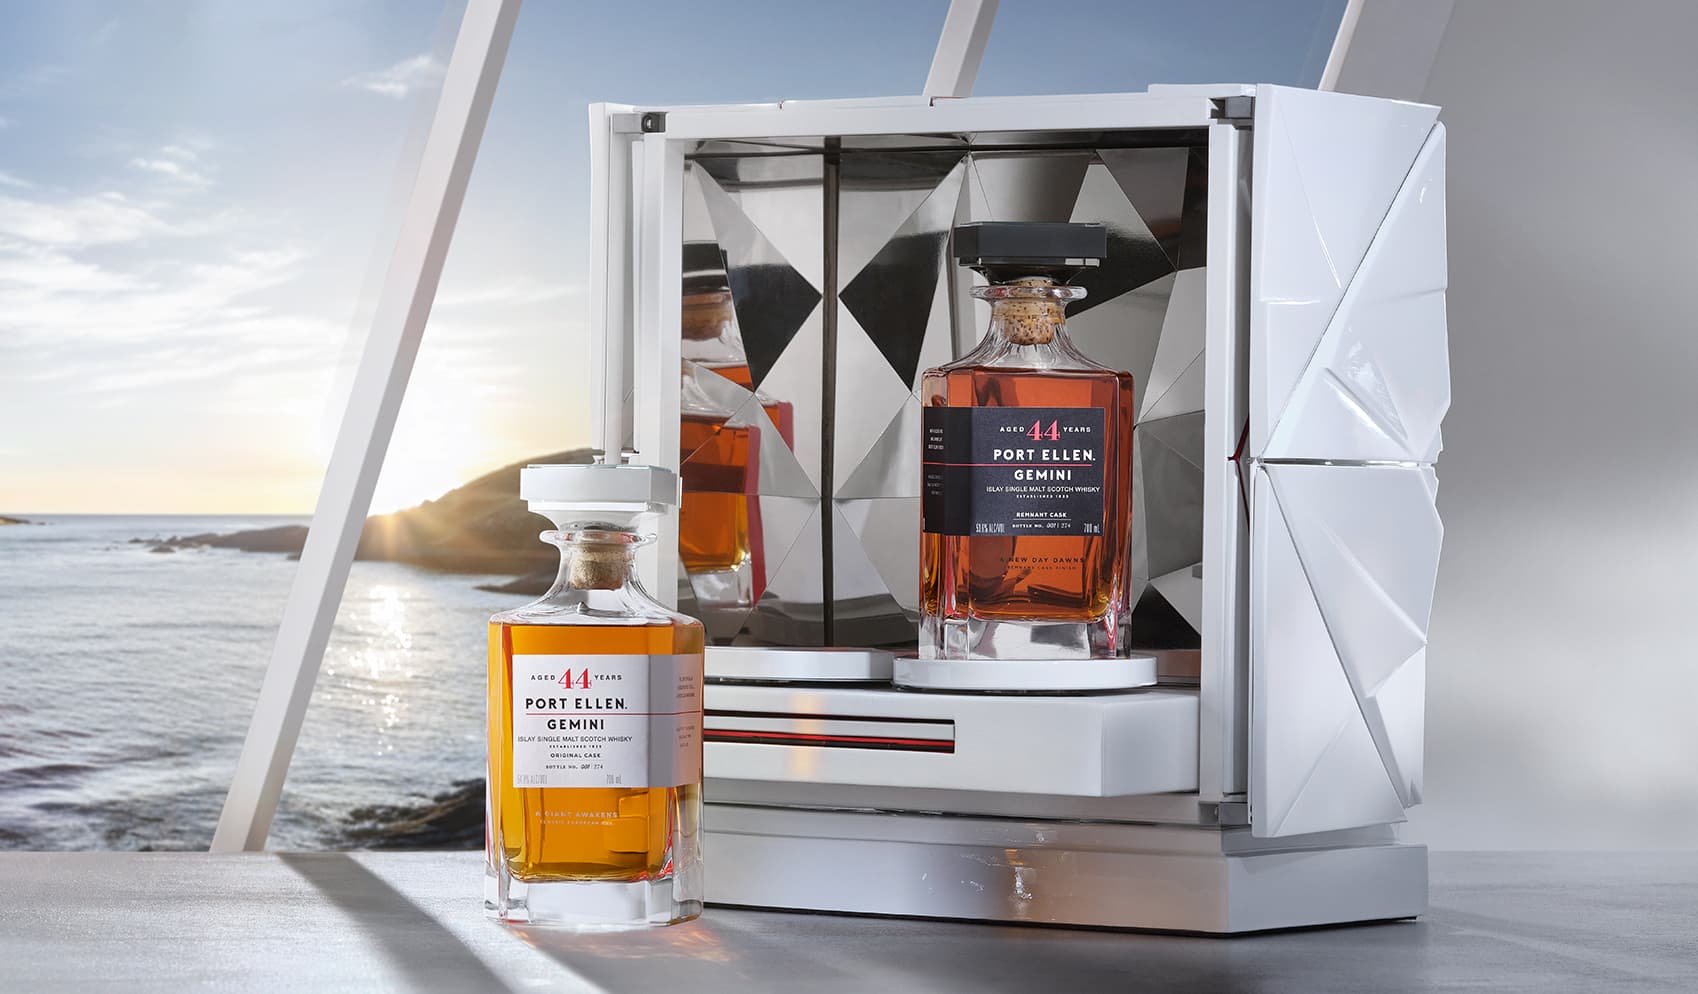 Twin port ellen gemini whisky bottles in front of a white case and window with ocean view